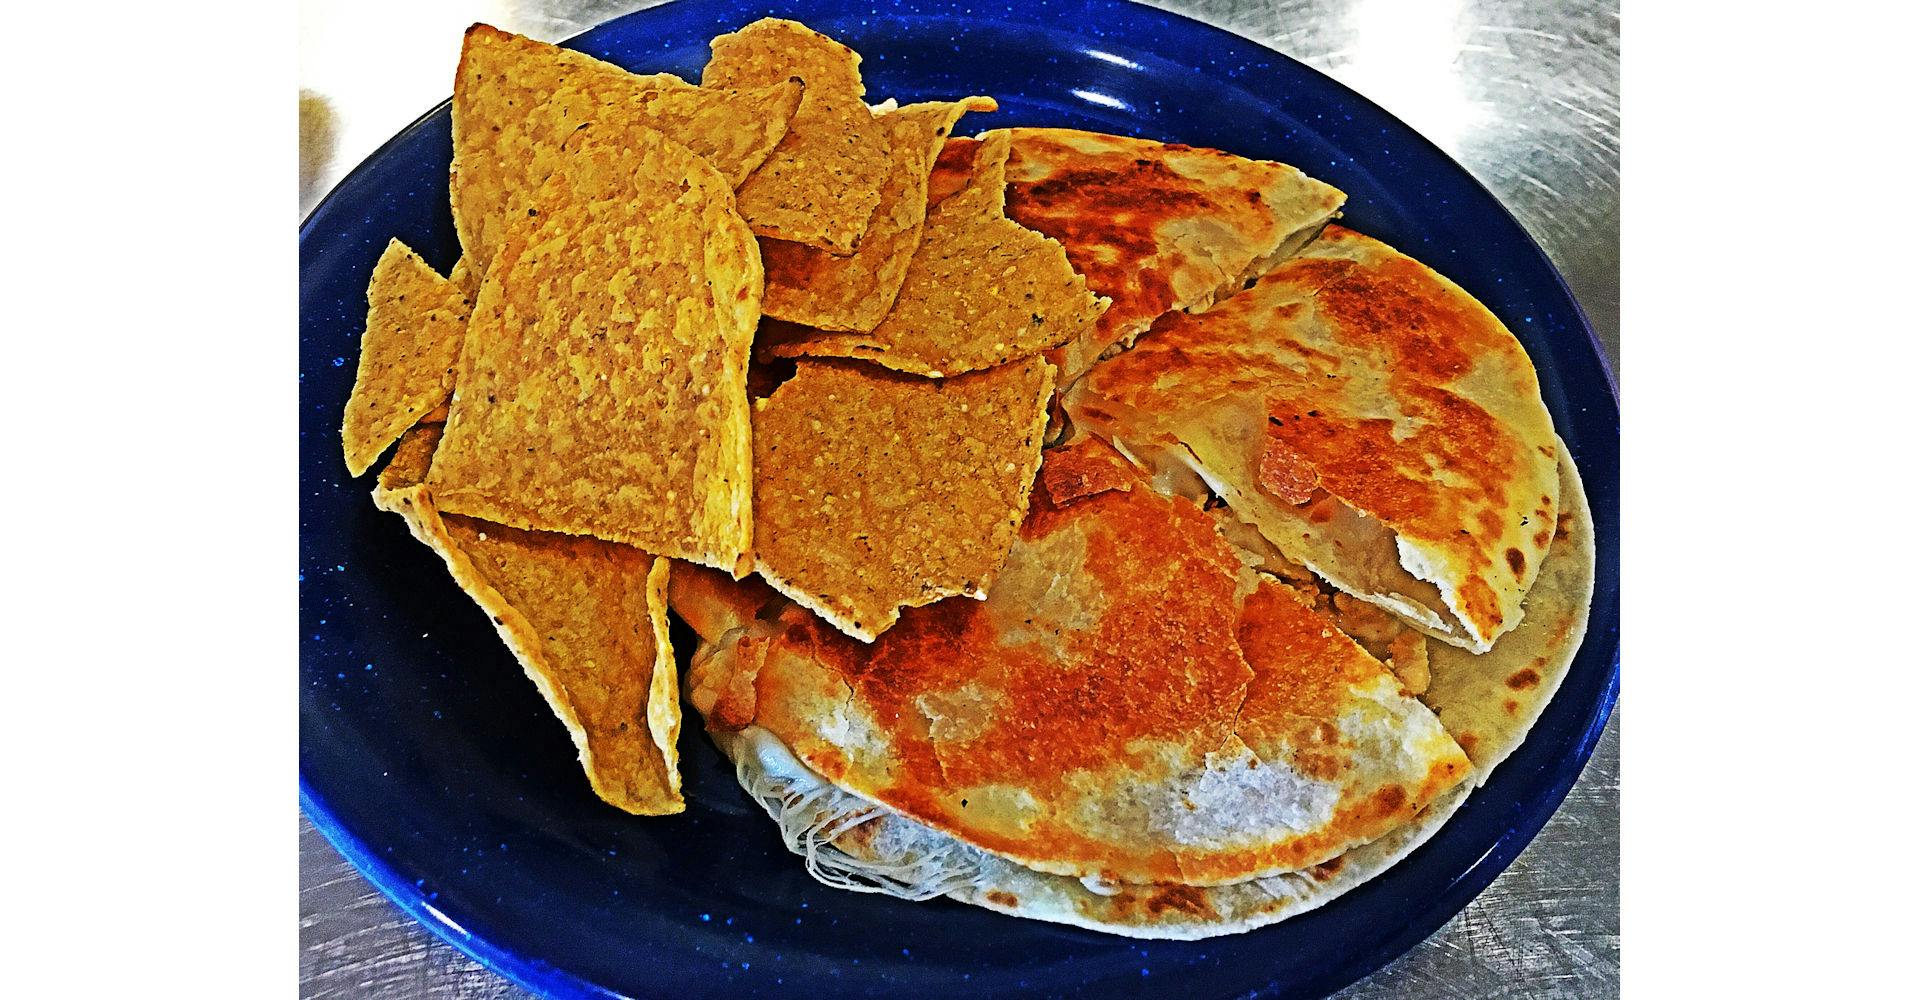 Kid's Quesadilla from Silly Serrano Mexican Restaurant in Eau Claire, WI